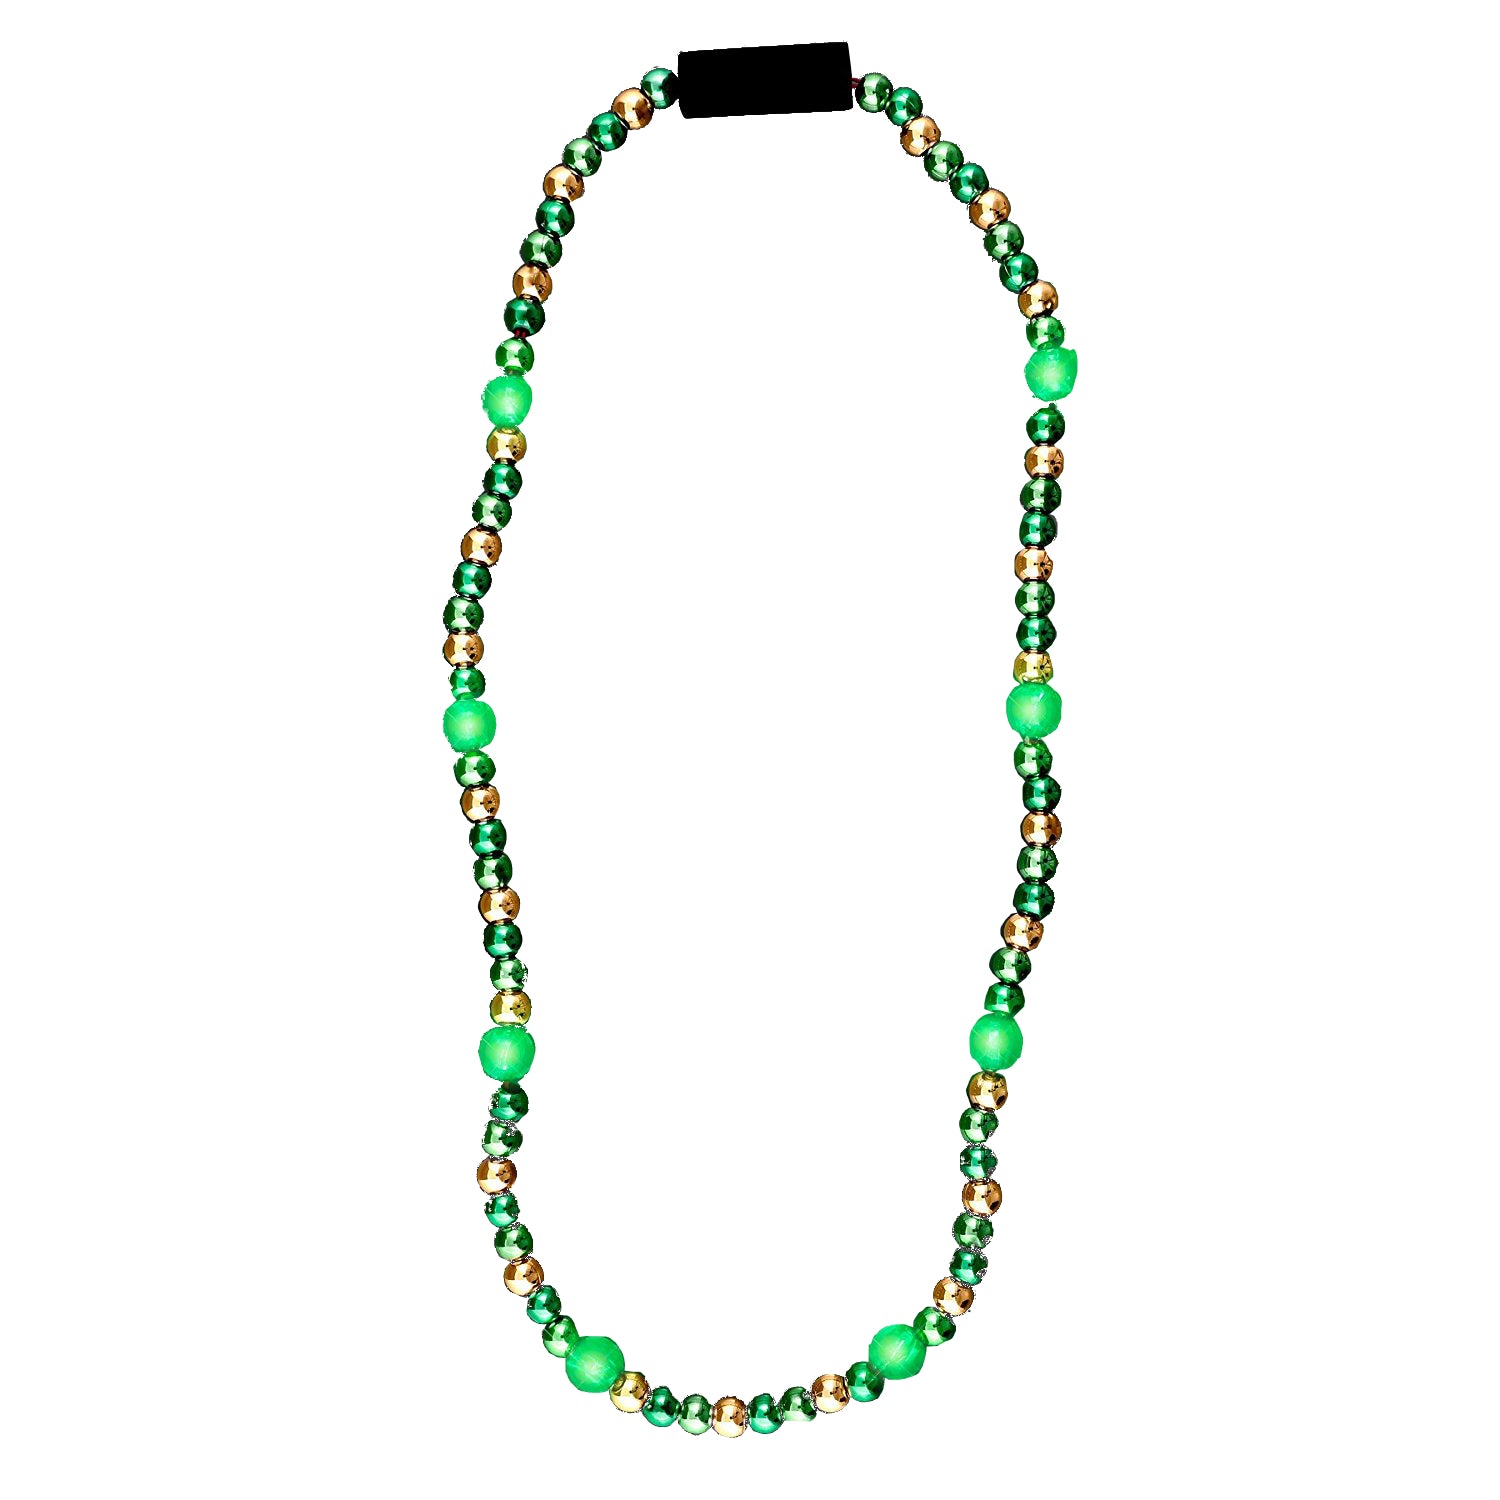 LED Bead Necklace Green and Gold